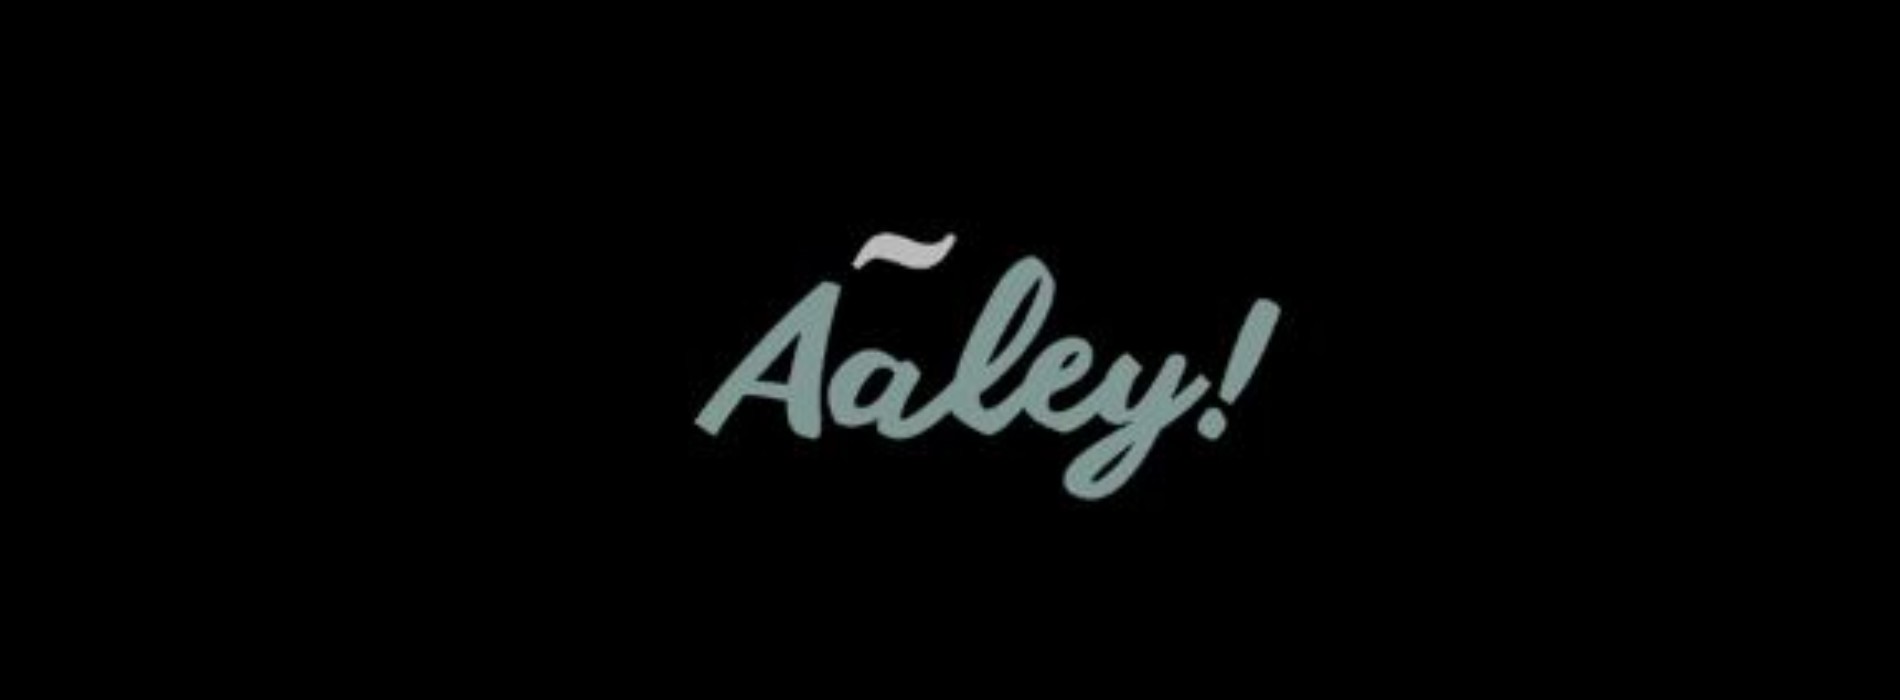 Daddy – Aaley (ආලේ)